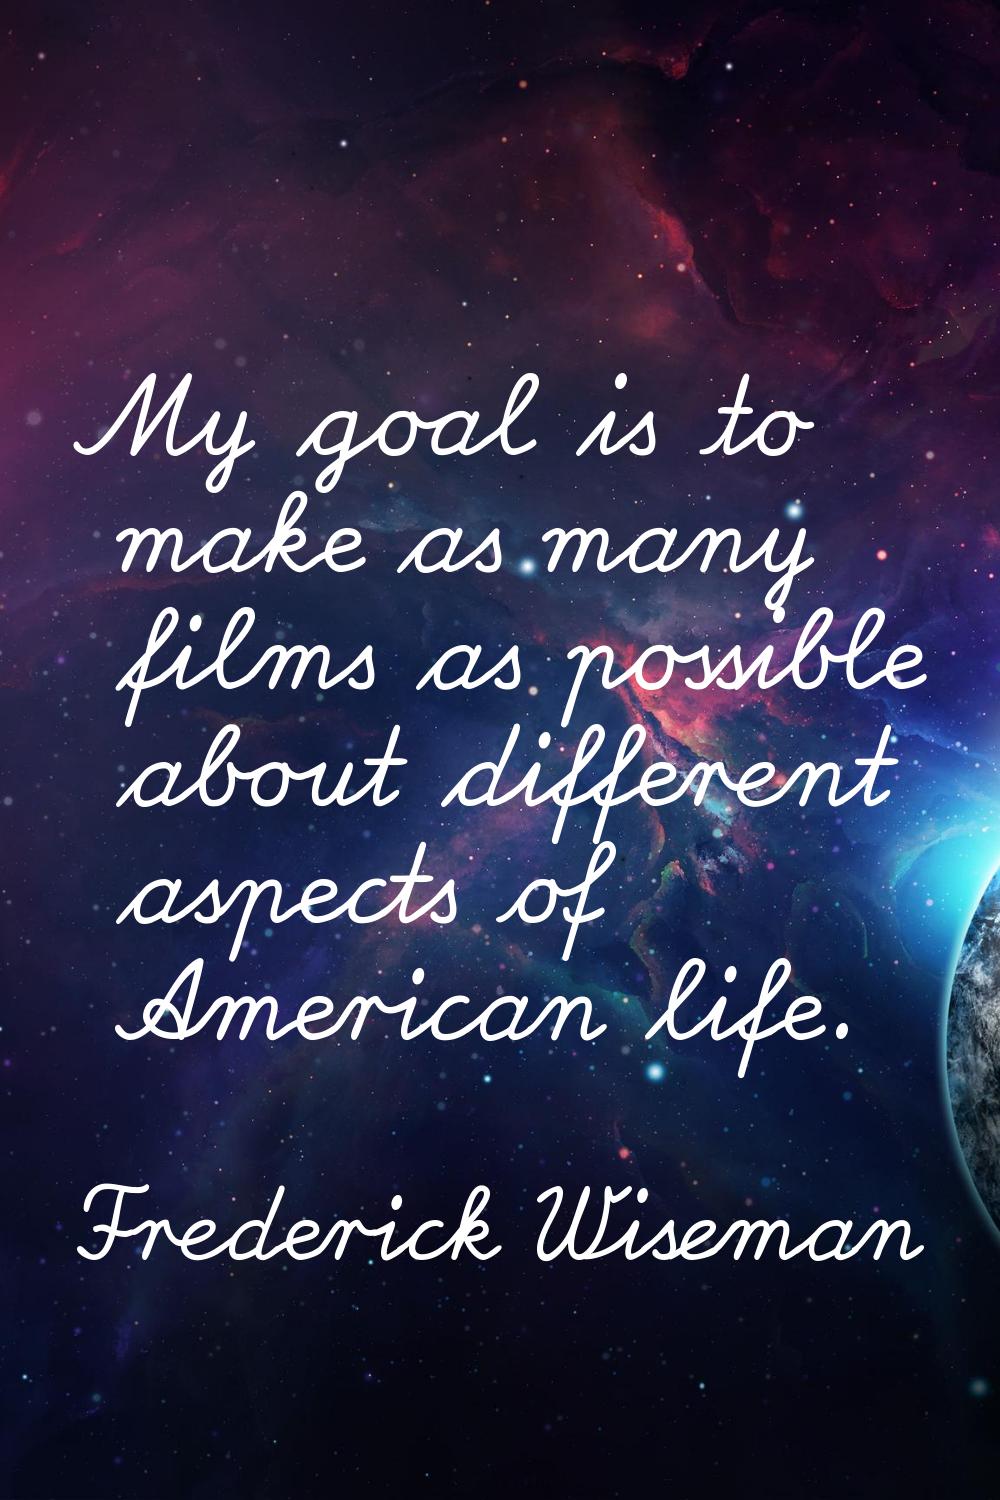 My goal is to make as many films as possible about different aspects of American life.